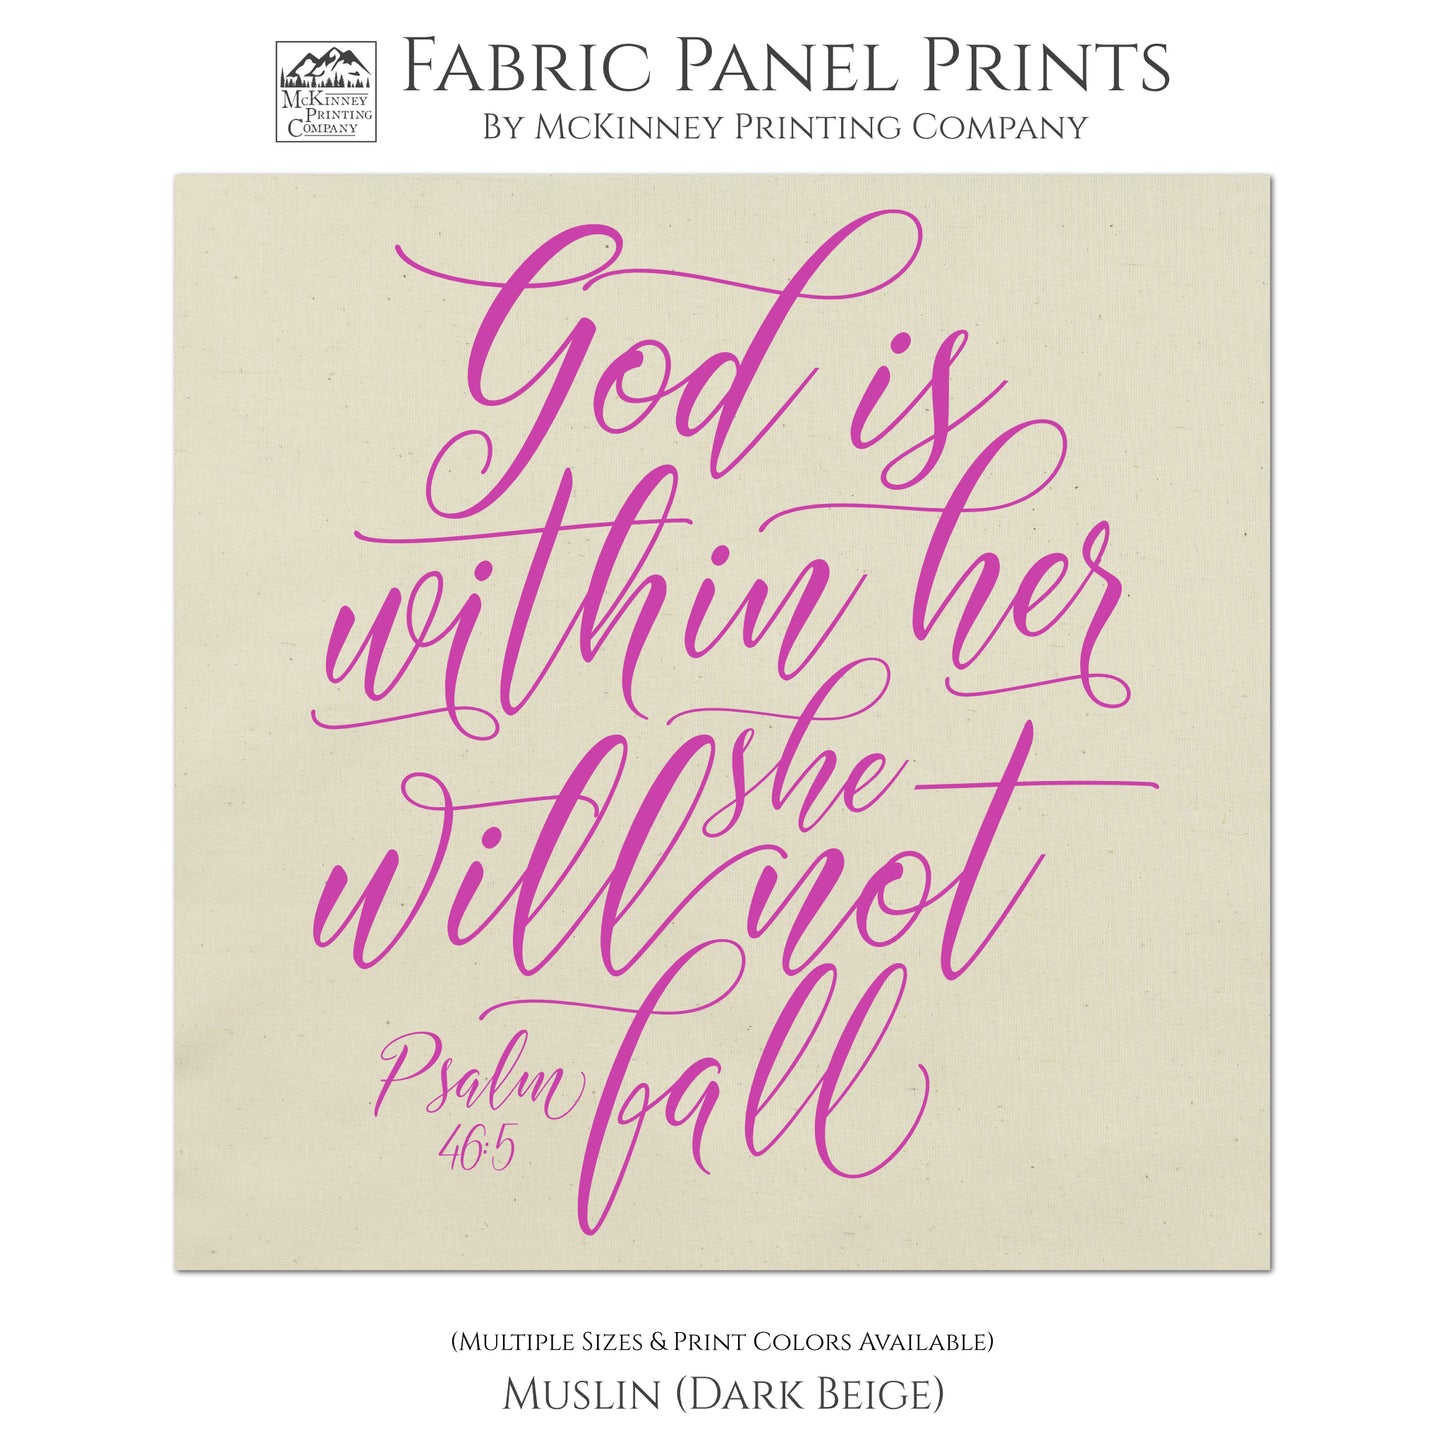 God is within her she will not fall - Psalm 46 5 - Fabric Panel Print, Scripture Fabric, Bible Verse Wall Art - Muslin